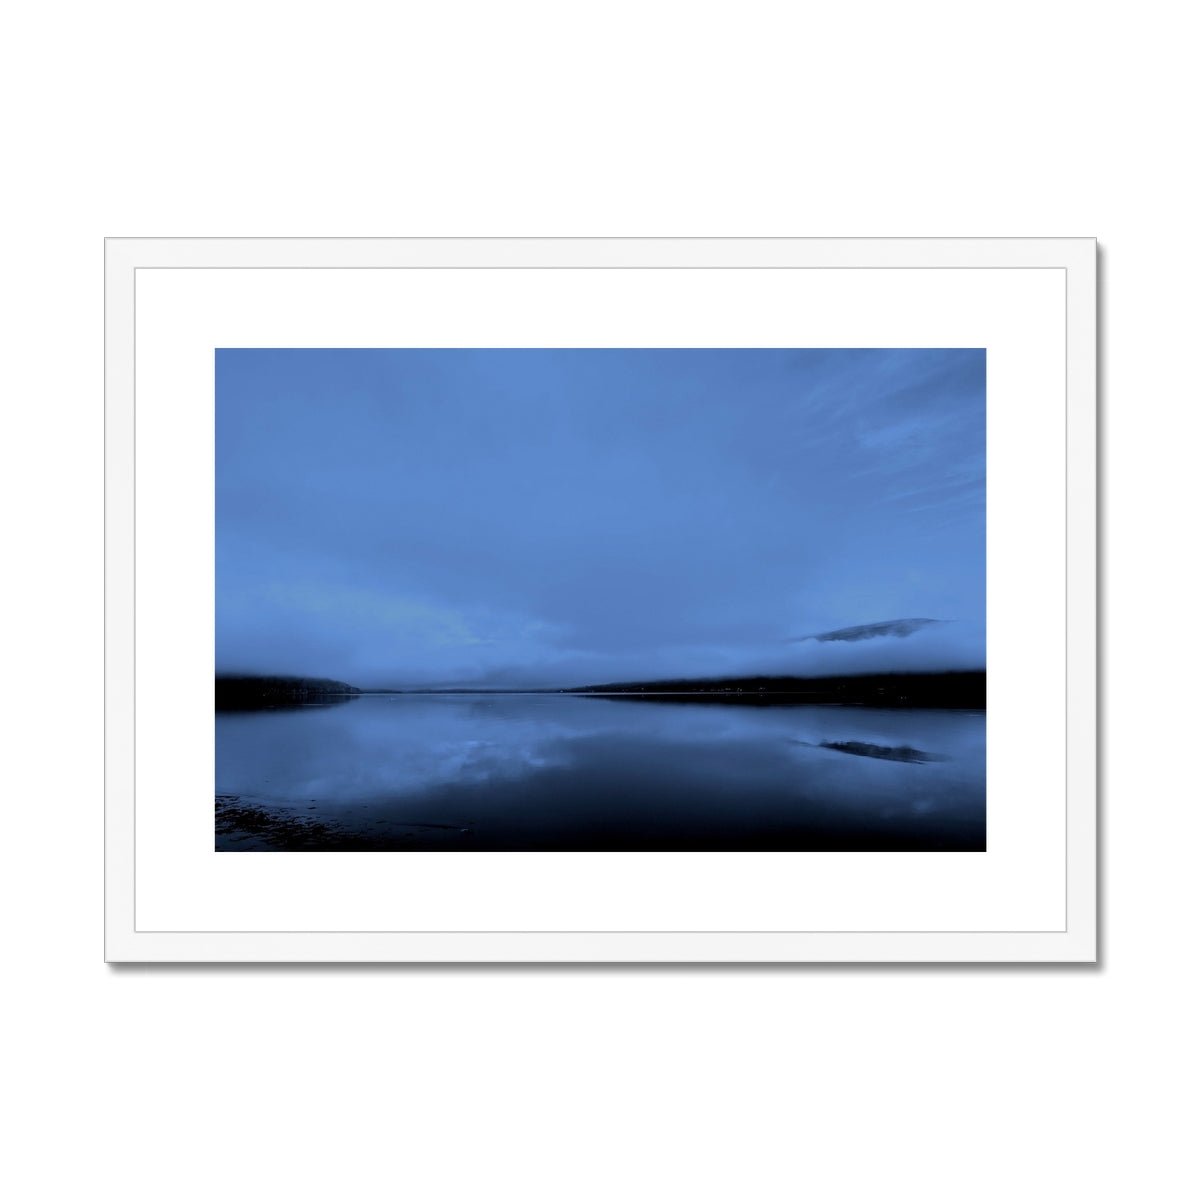 The Blue Hour Loch Fyne Painting | Framed & Mounted Prints From Scotland-Framed & Mounted Prints-Scottish Lochs & Mountains Art Gallery-A2 Landscape-White Frame-Paintings, Prints, Homeware, Art Gifts From Scotland By Scottish Artist Kevin Hunter